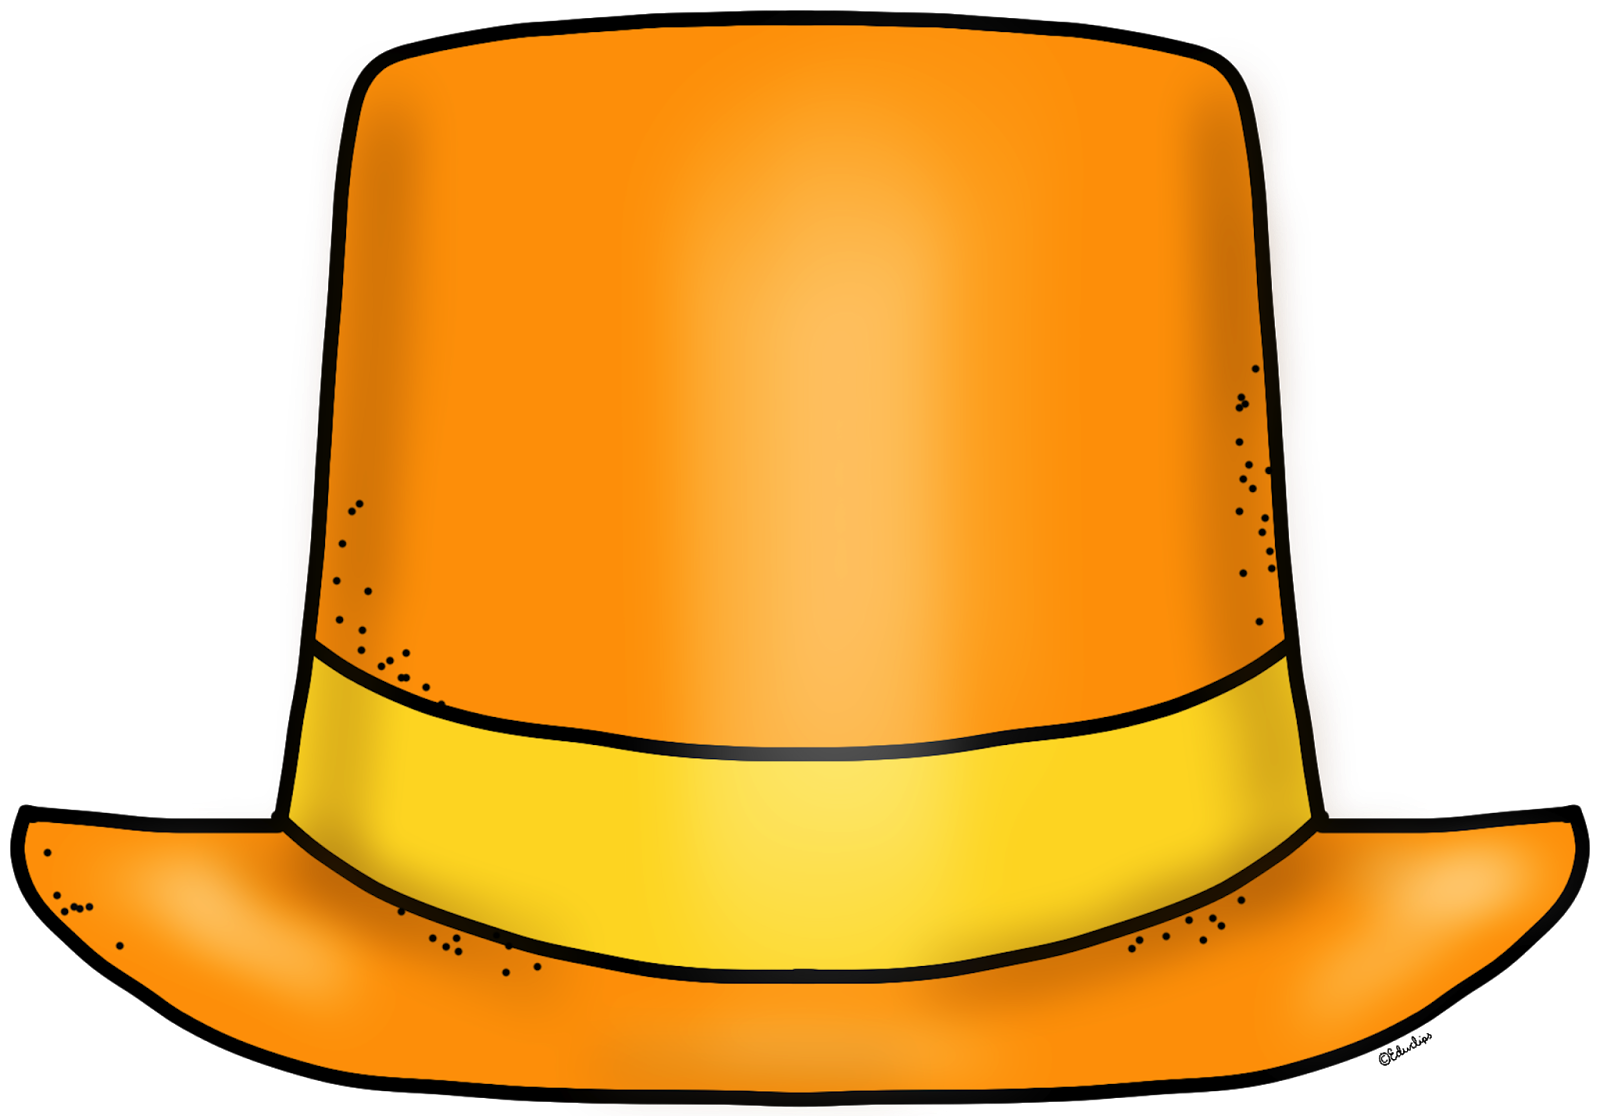 new year hat clipart - photo #36